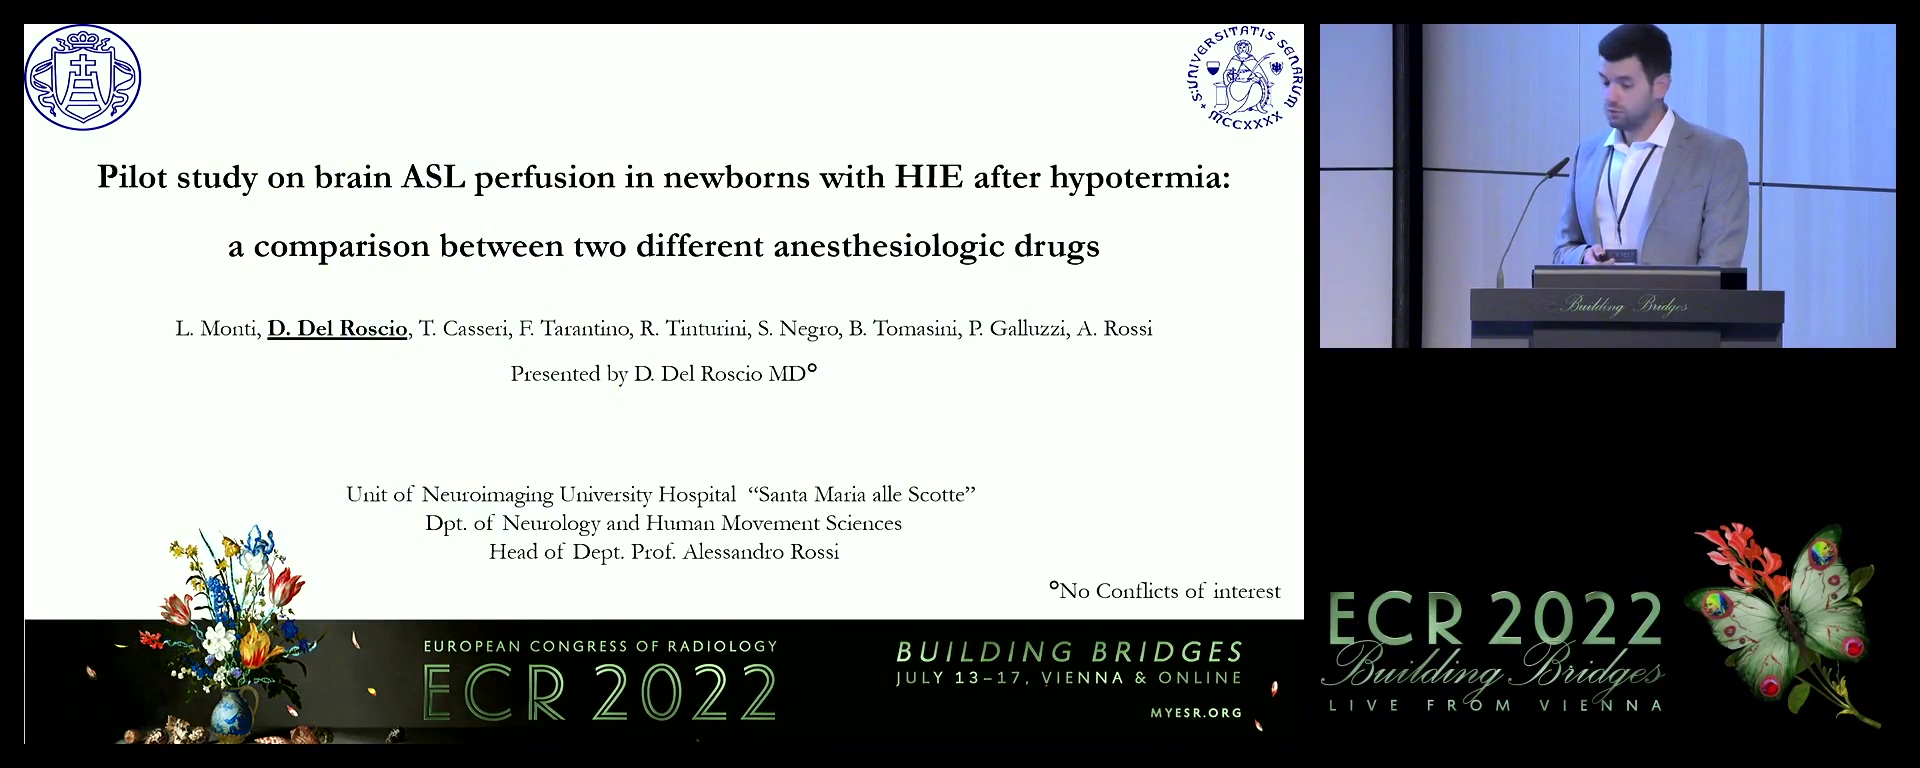 Pilot study on brain ASL perfusion in newborns with HIE after hypothermia: a comparison between two different anesthesiologic drugs - Davide Del Roscio, Siena / IT